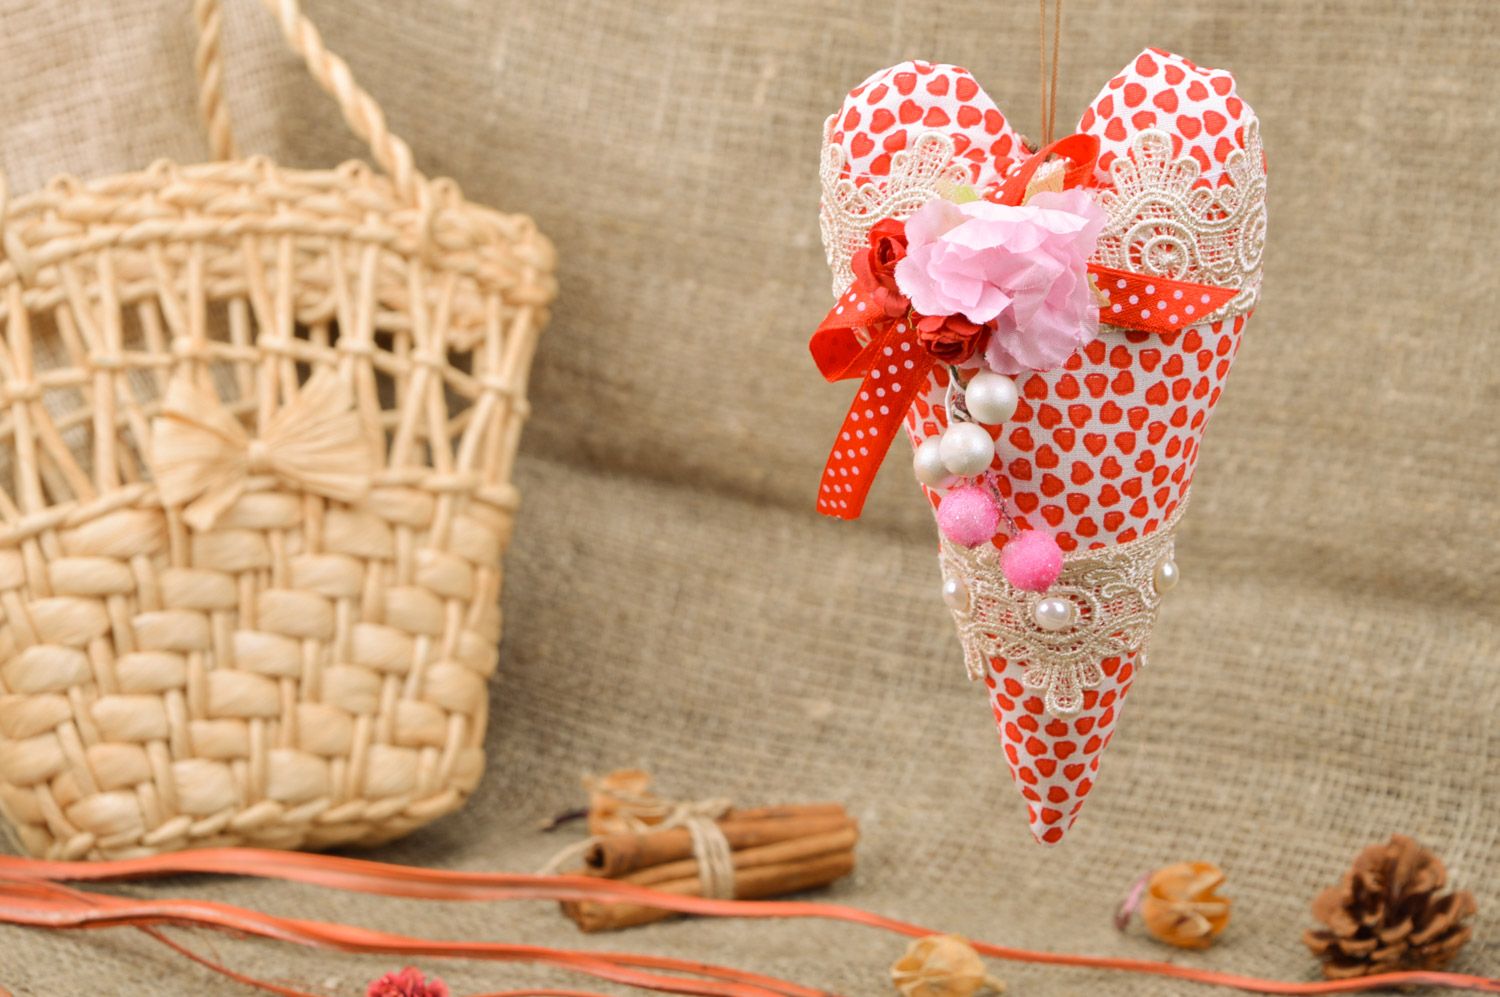 Handmade heart-shaped decorative wall hanging decoration sewn of cotton with lace photo 1